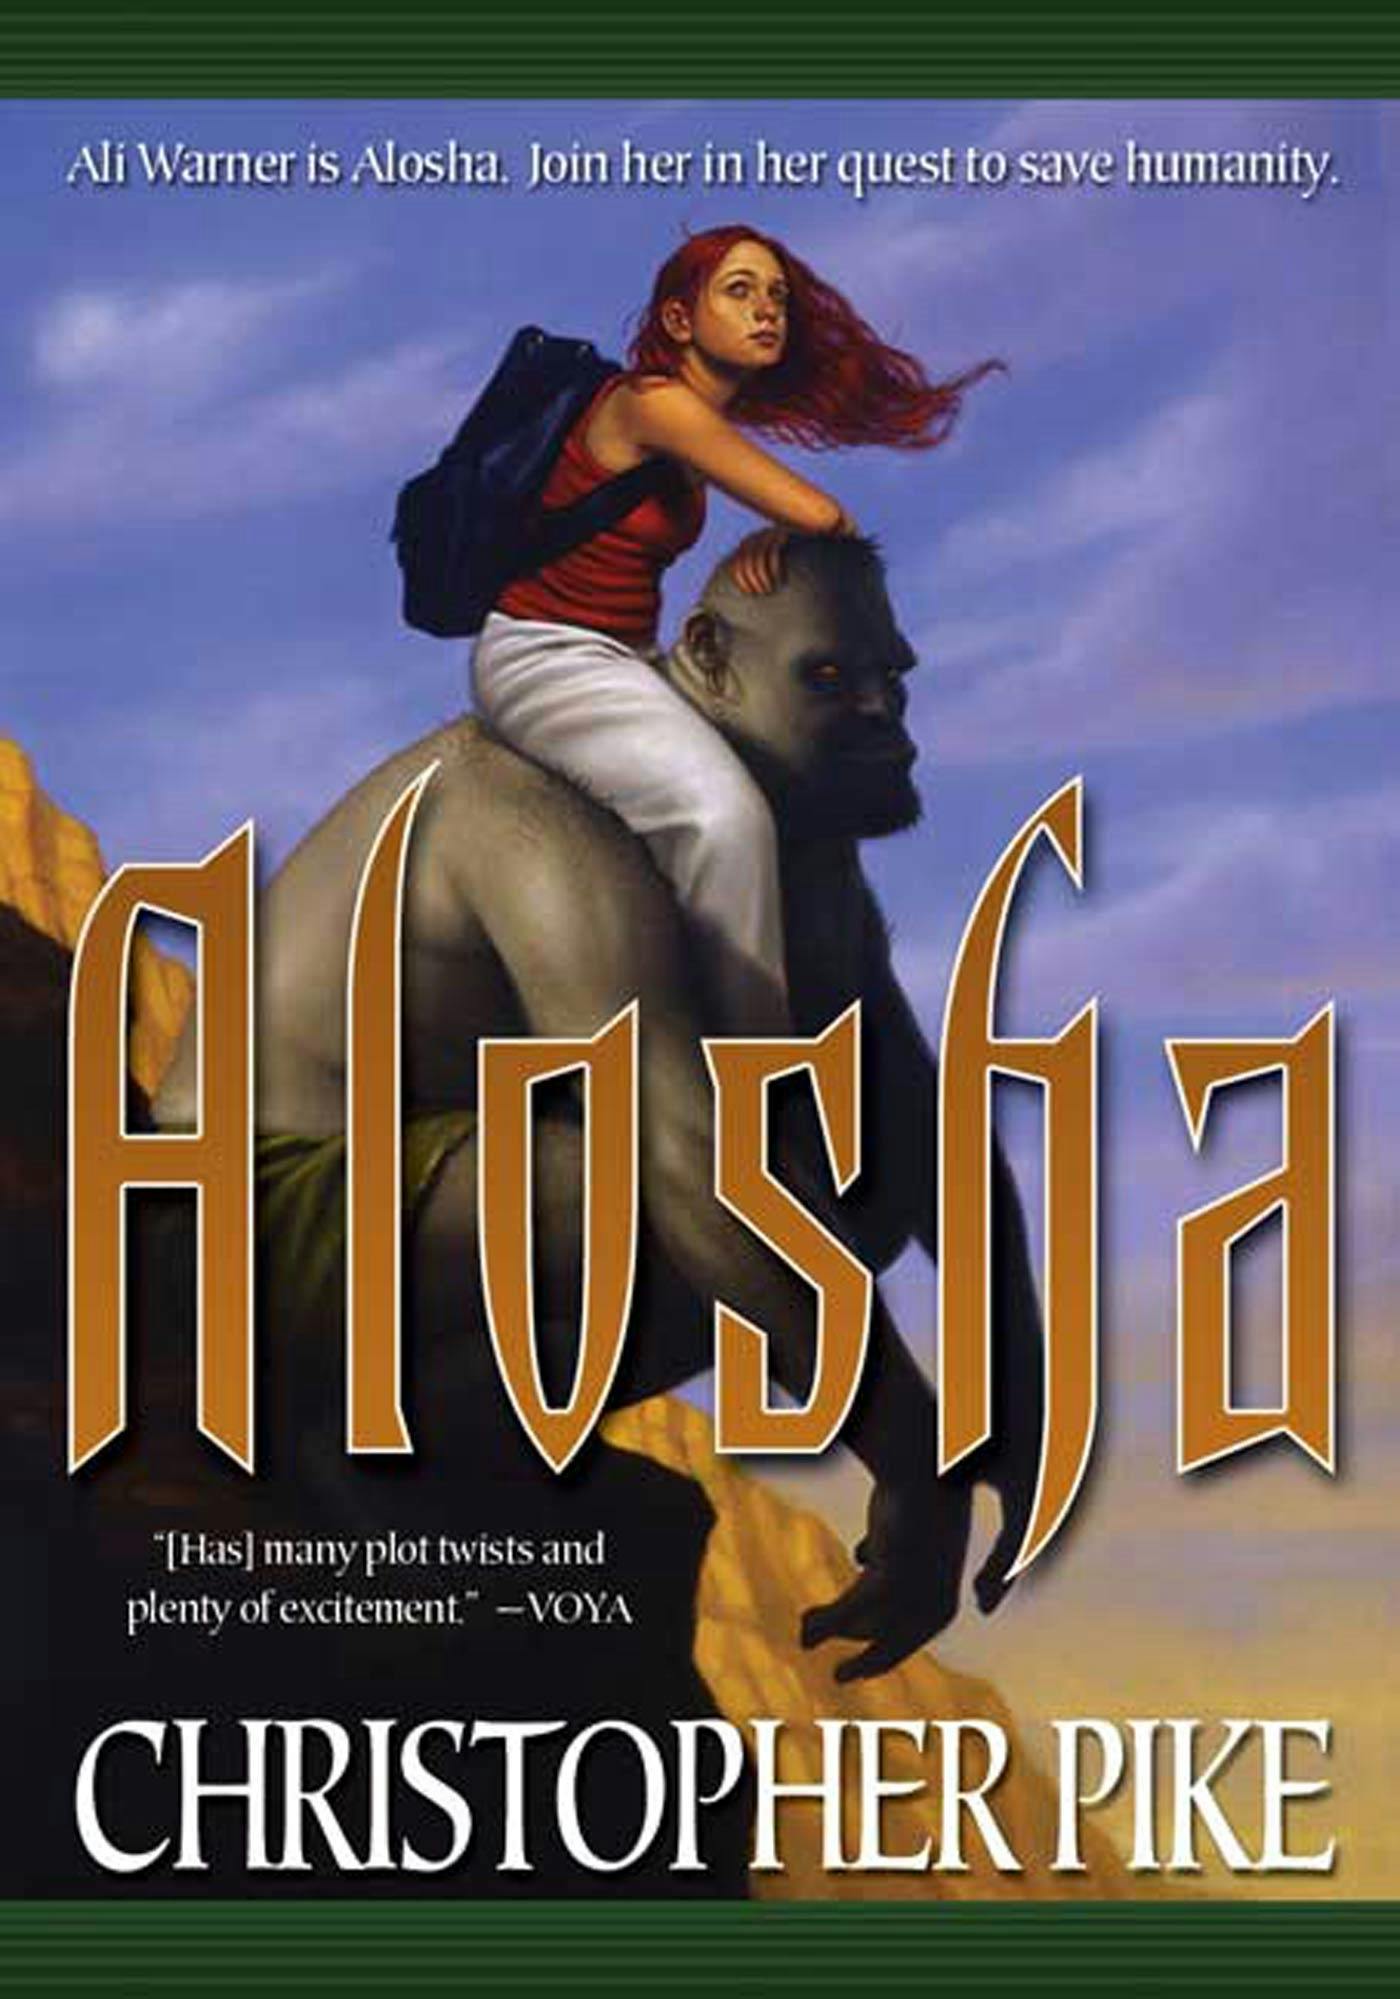 Cover for the book titled as: Alosha